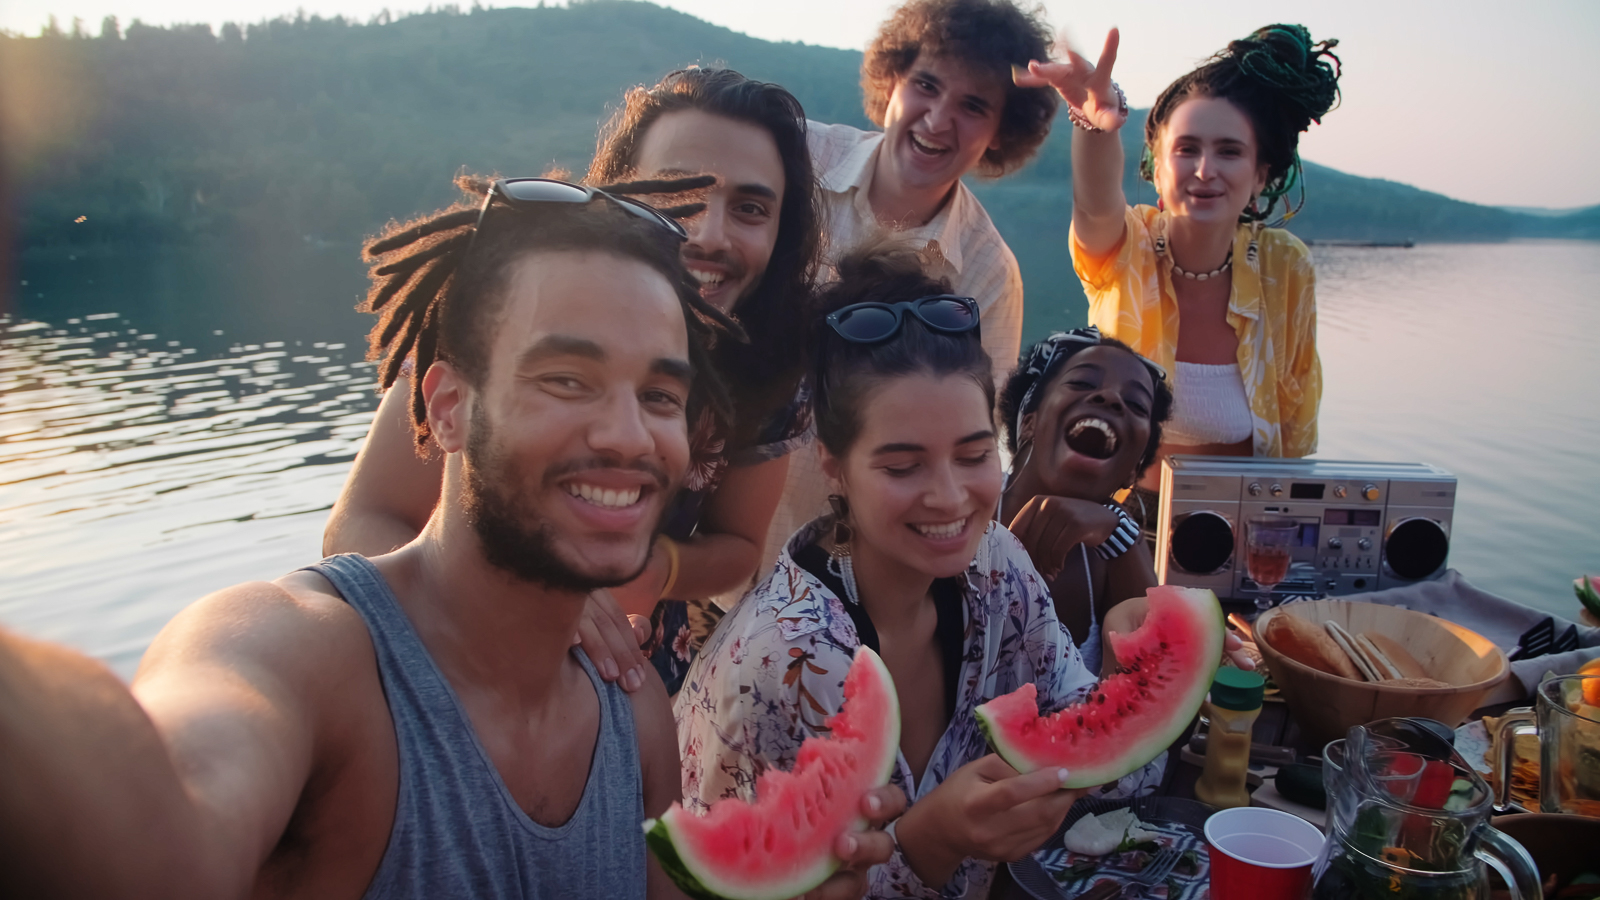 Friends taking a selfie with their fresh watermelon pieces